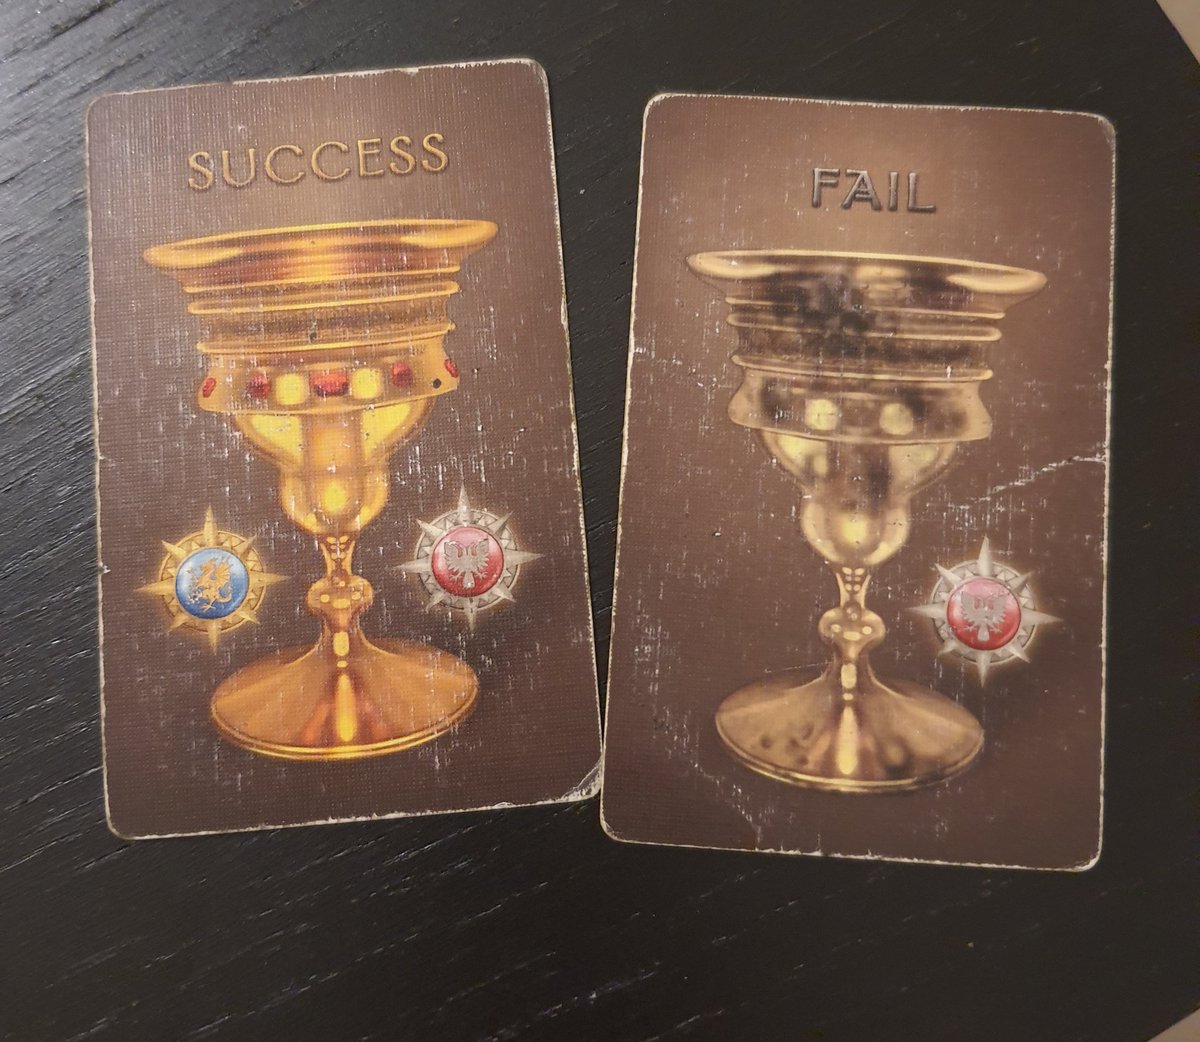 Ok so, let's say the mission got approved3 people go on a missionA loyal servant of Arthur (has no role and they are on the good side), Percival and MorganaTHE MASTER will give a pair of these cards face down to every one of these 3 players going on a mission ONLY THEM